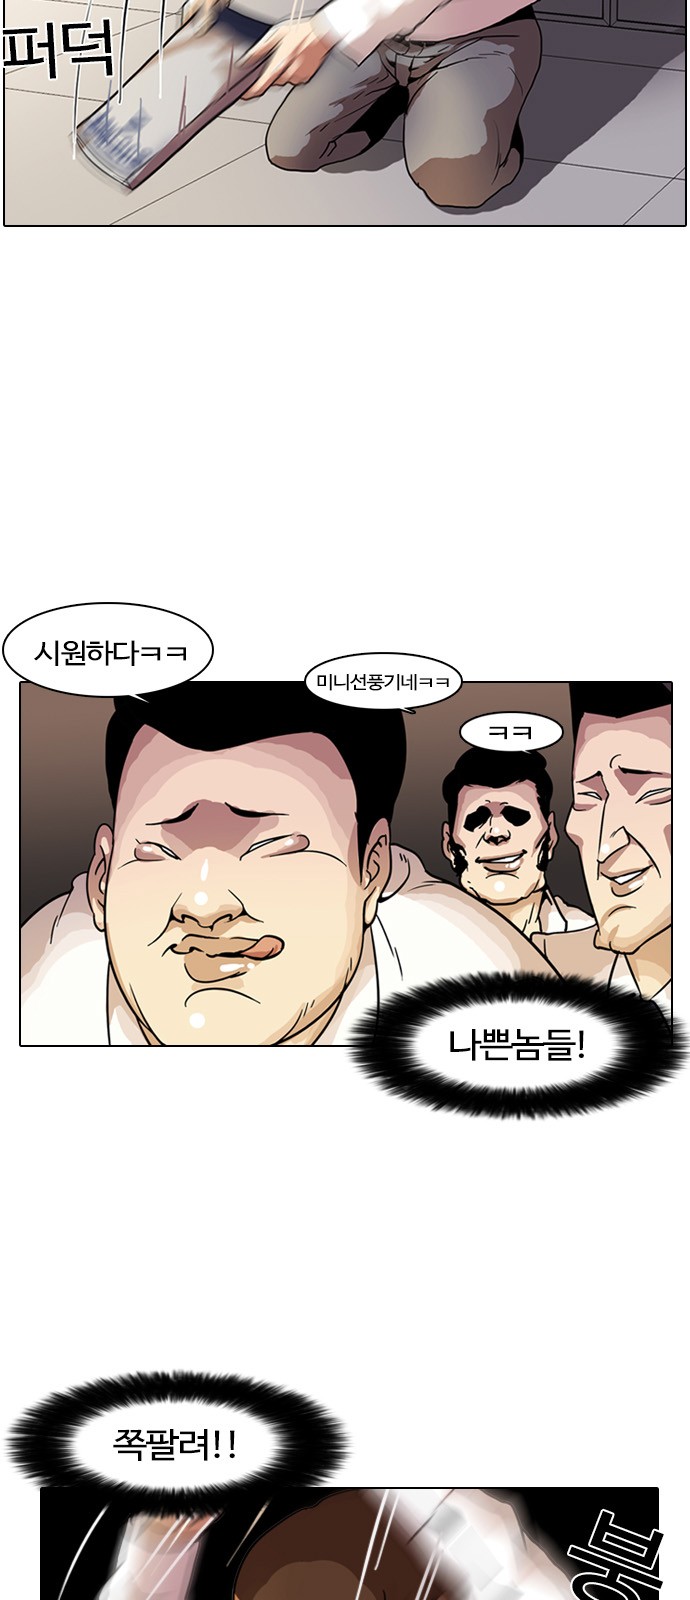 Lookism - Chapter 4 - Page 4